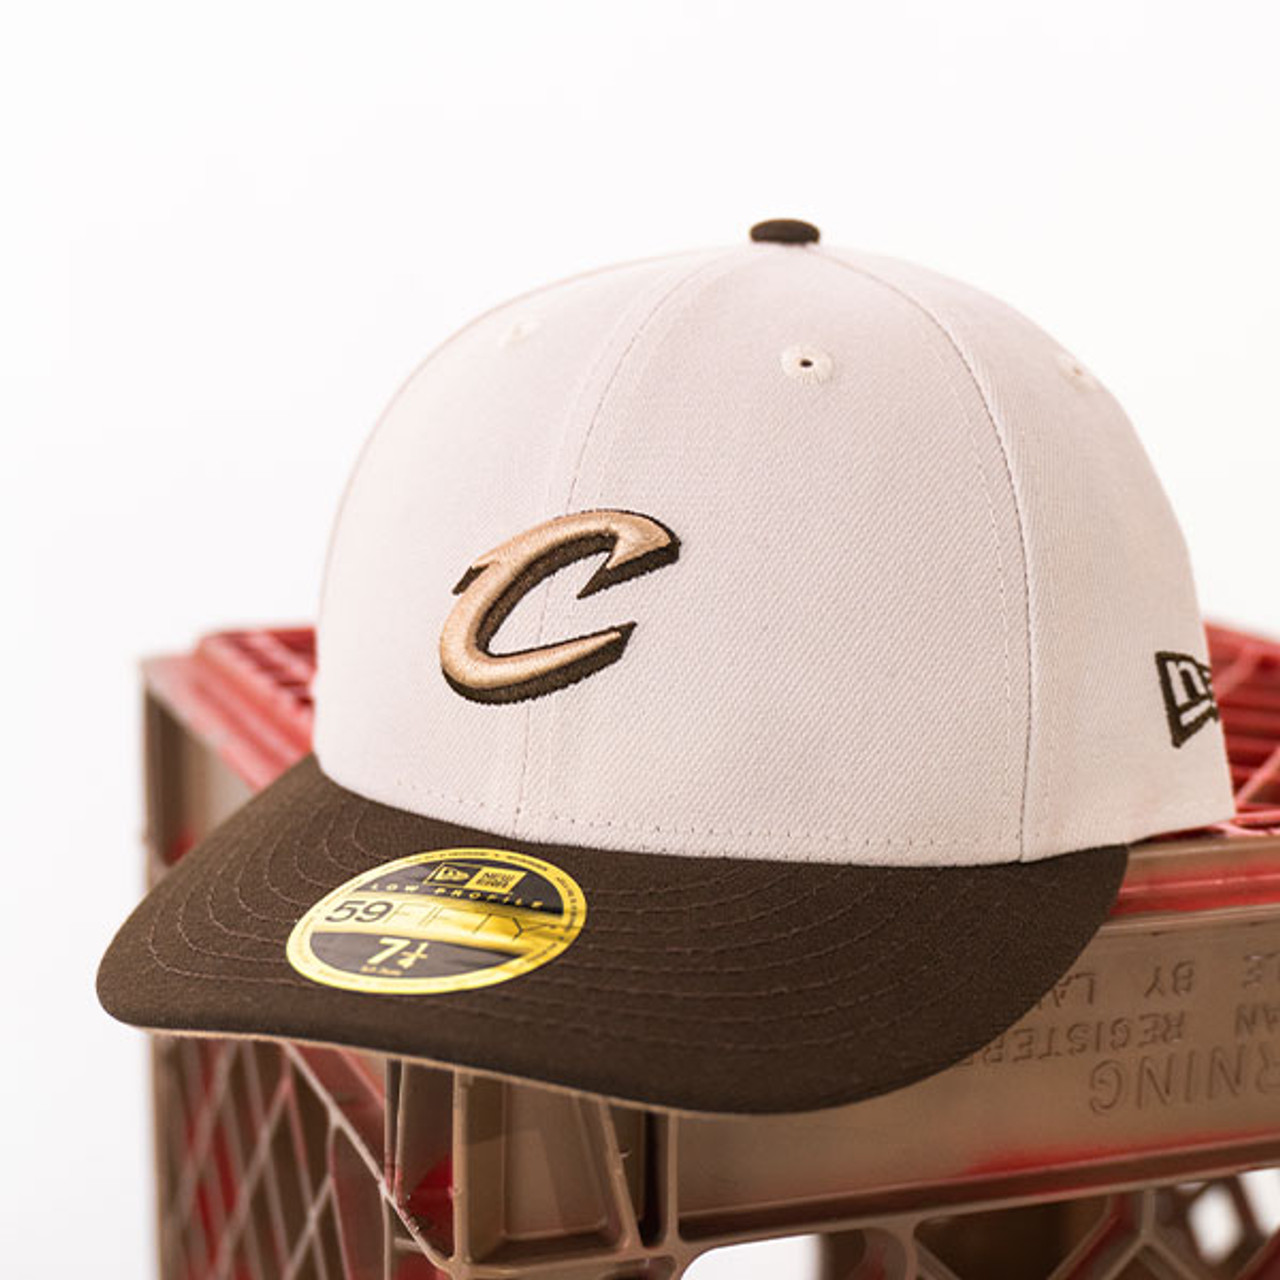 59FIFTY Caps, Fitted Caps, Shop by Style